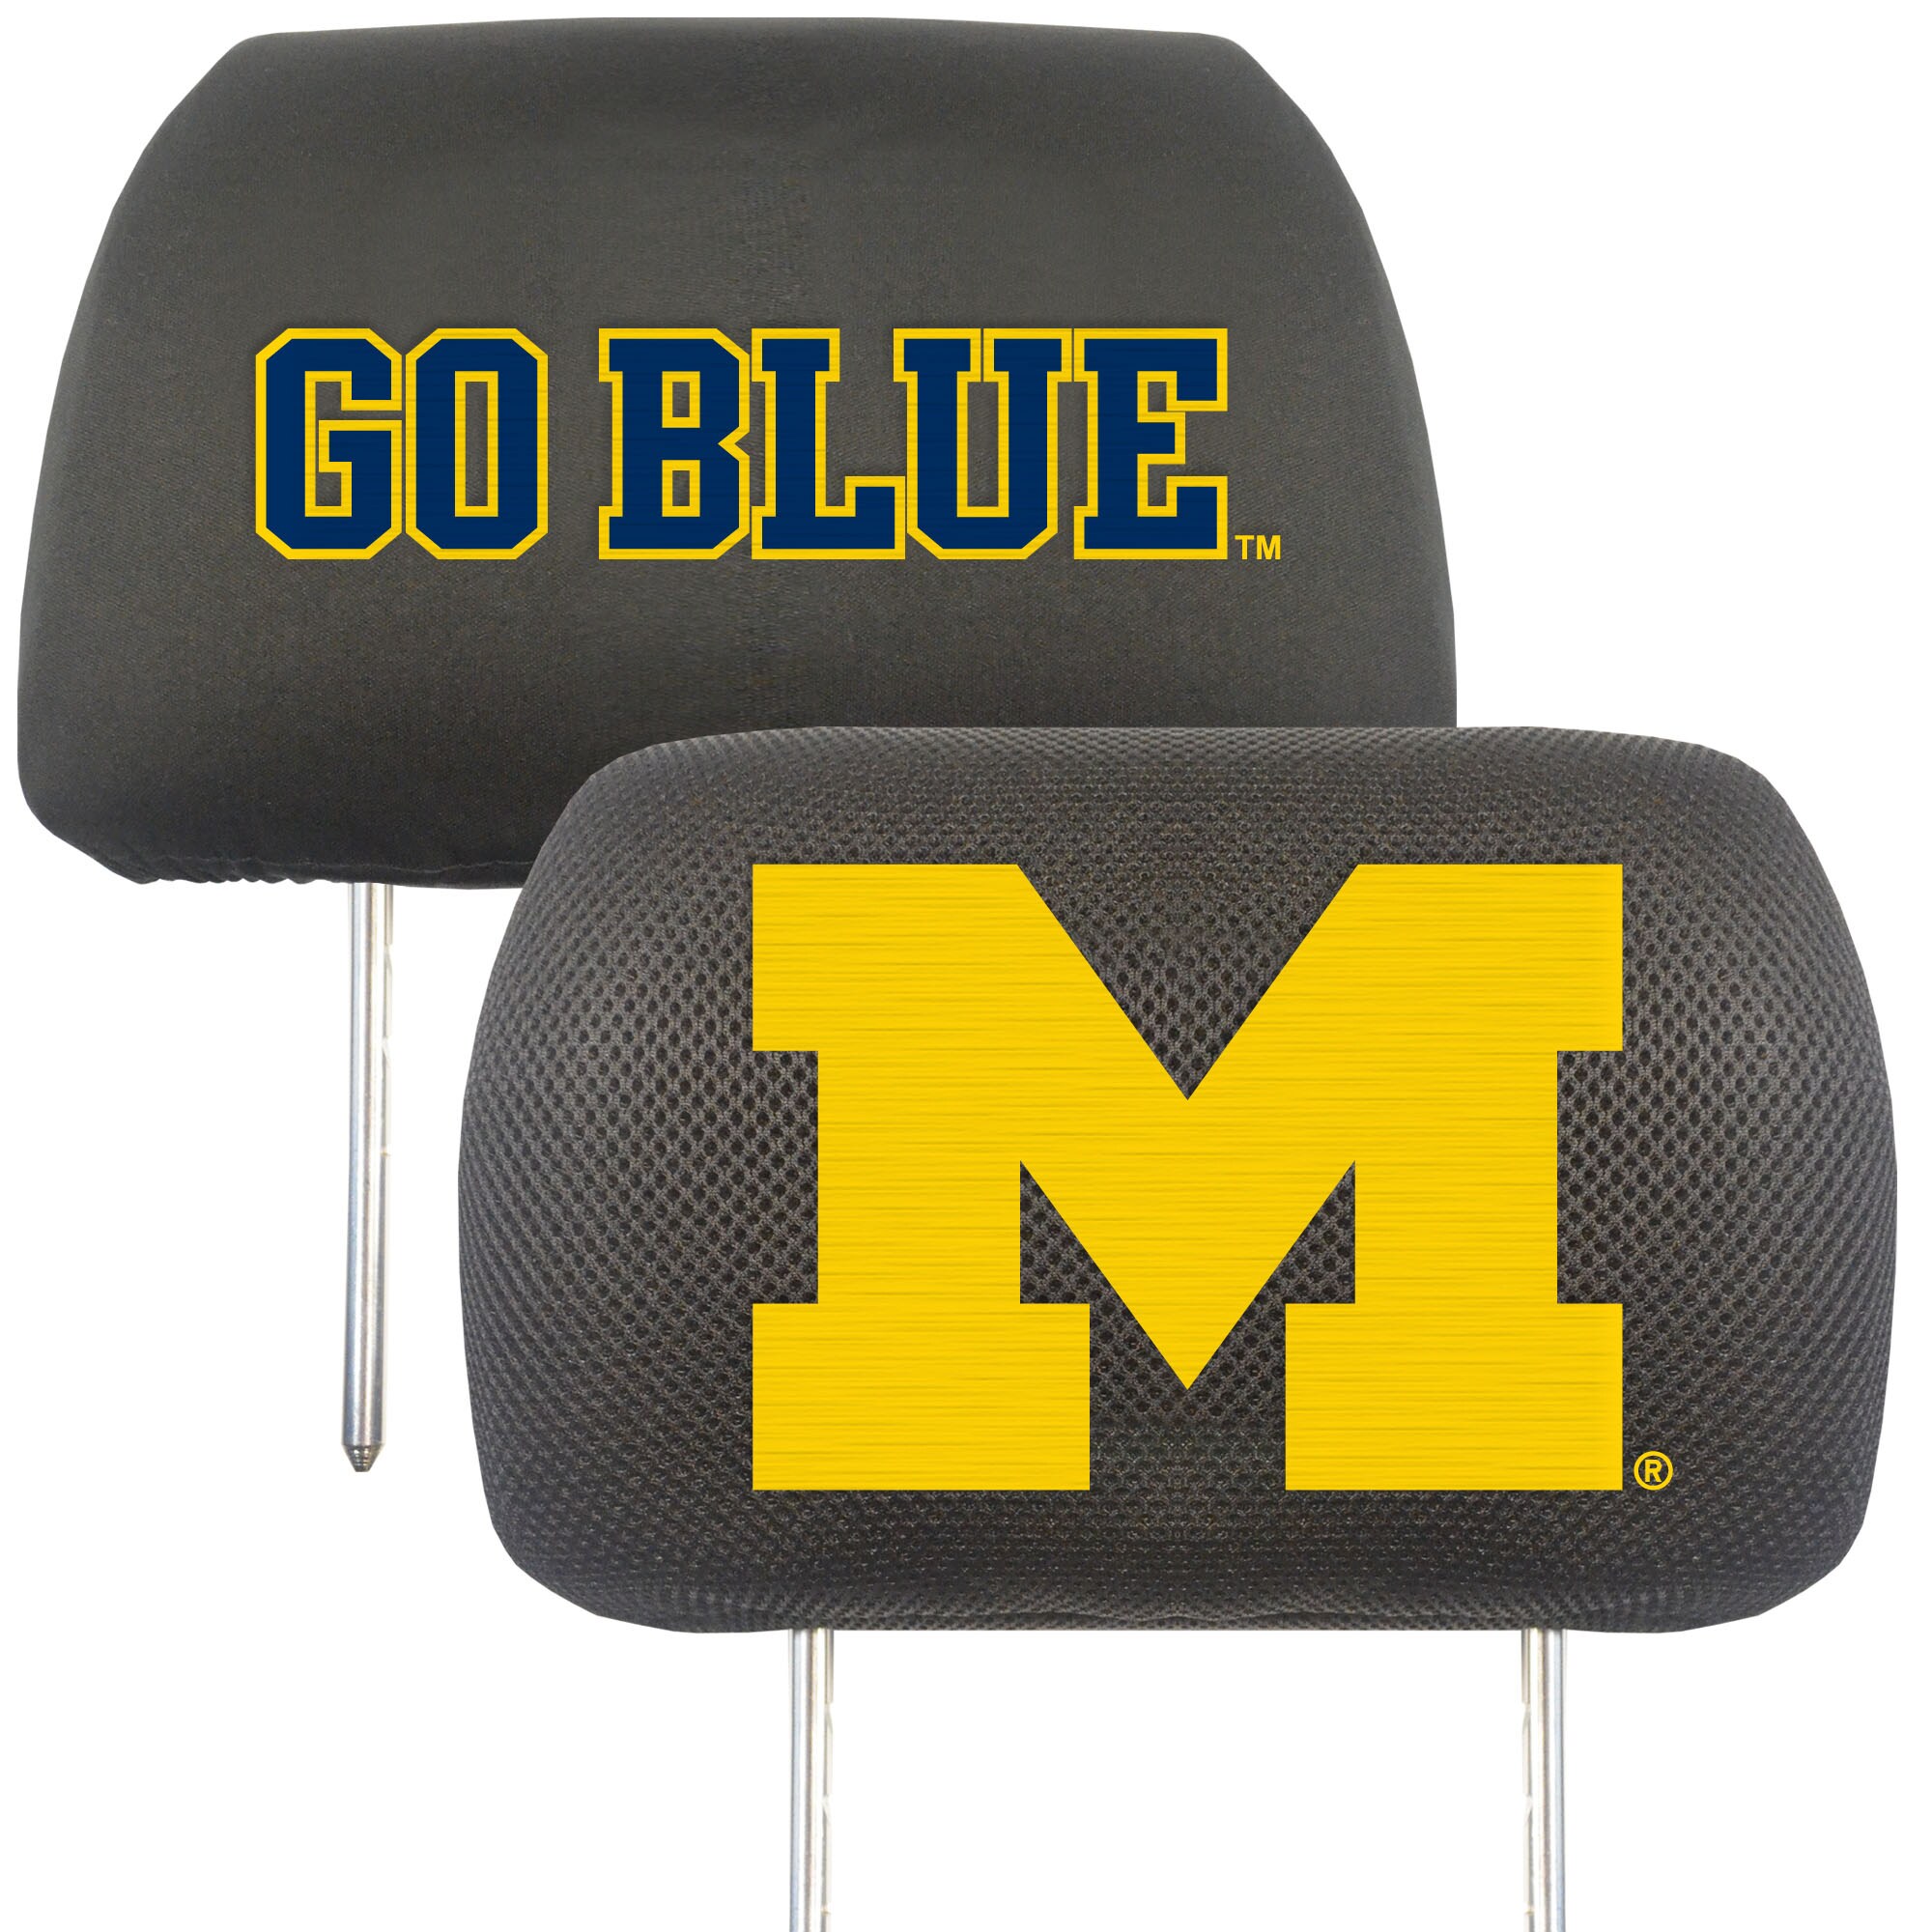 New NCAA Michigan Wolverines Car Truck Front Rear Floor Mats & Seat Covers Set 